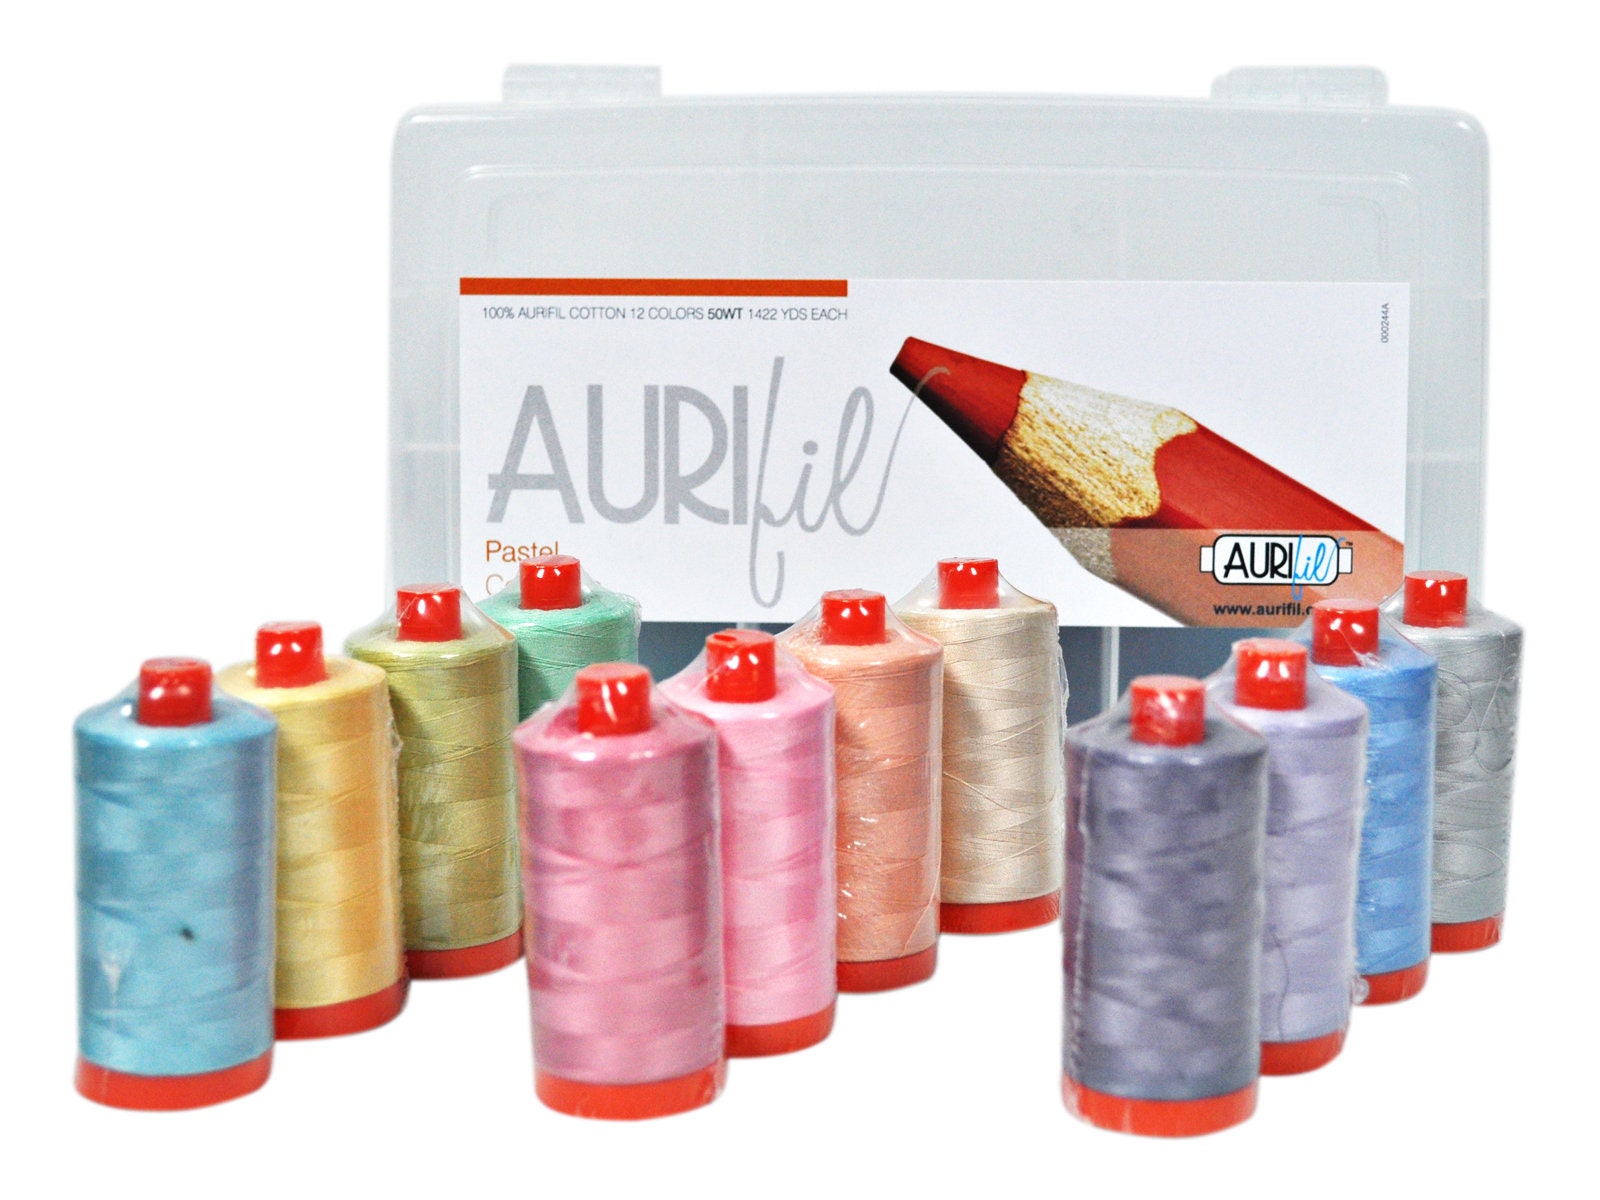 Aurifil Thread Set THE PERFECT BOX OF COLORS By Pat Sloan 50wt Cotton 12  Large (1422 yard) Spools 